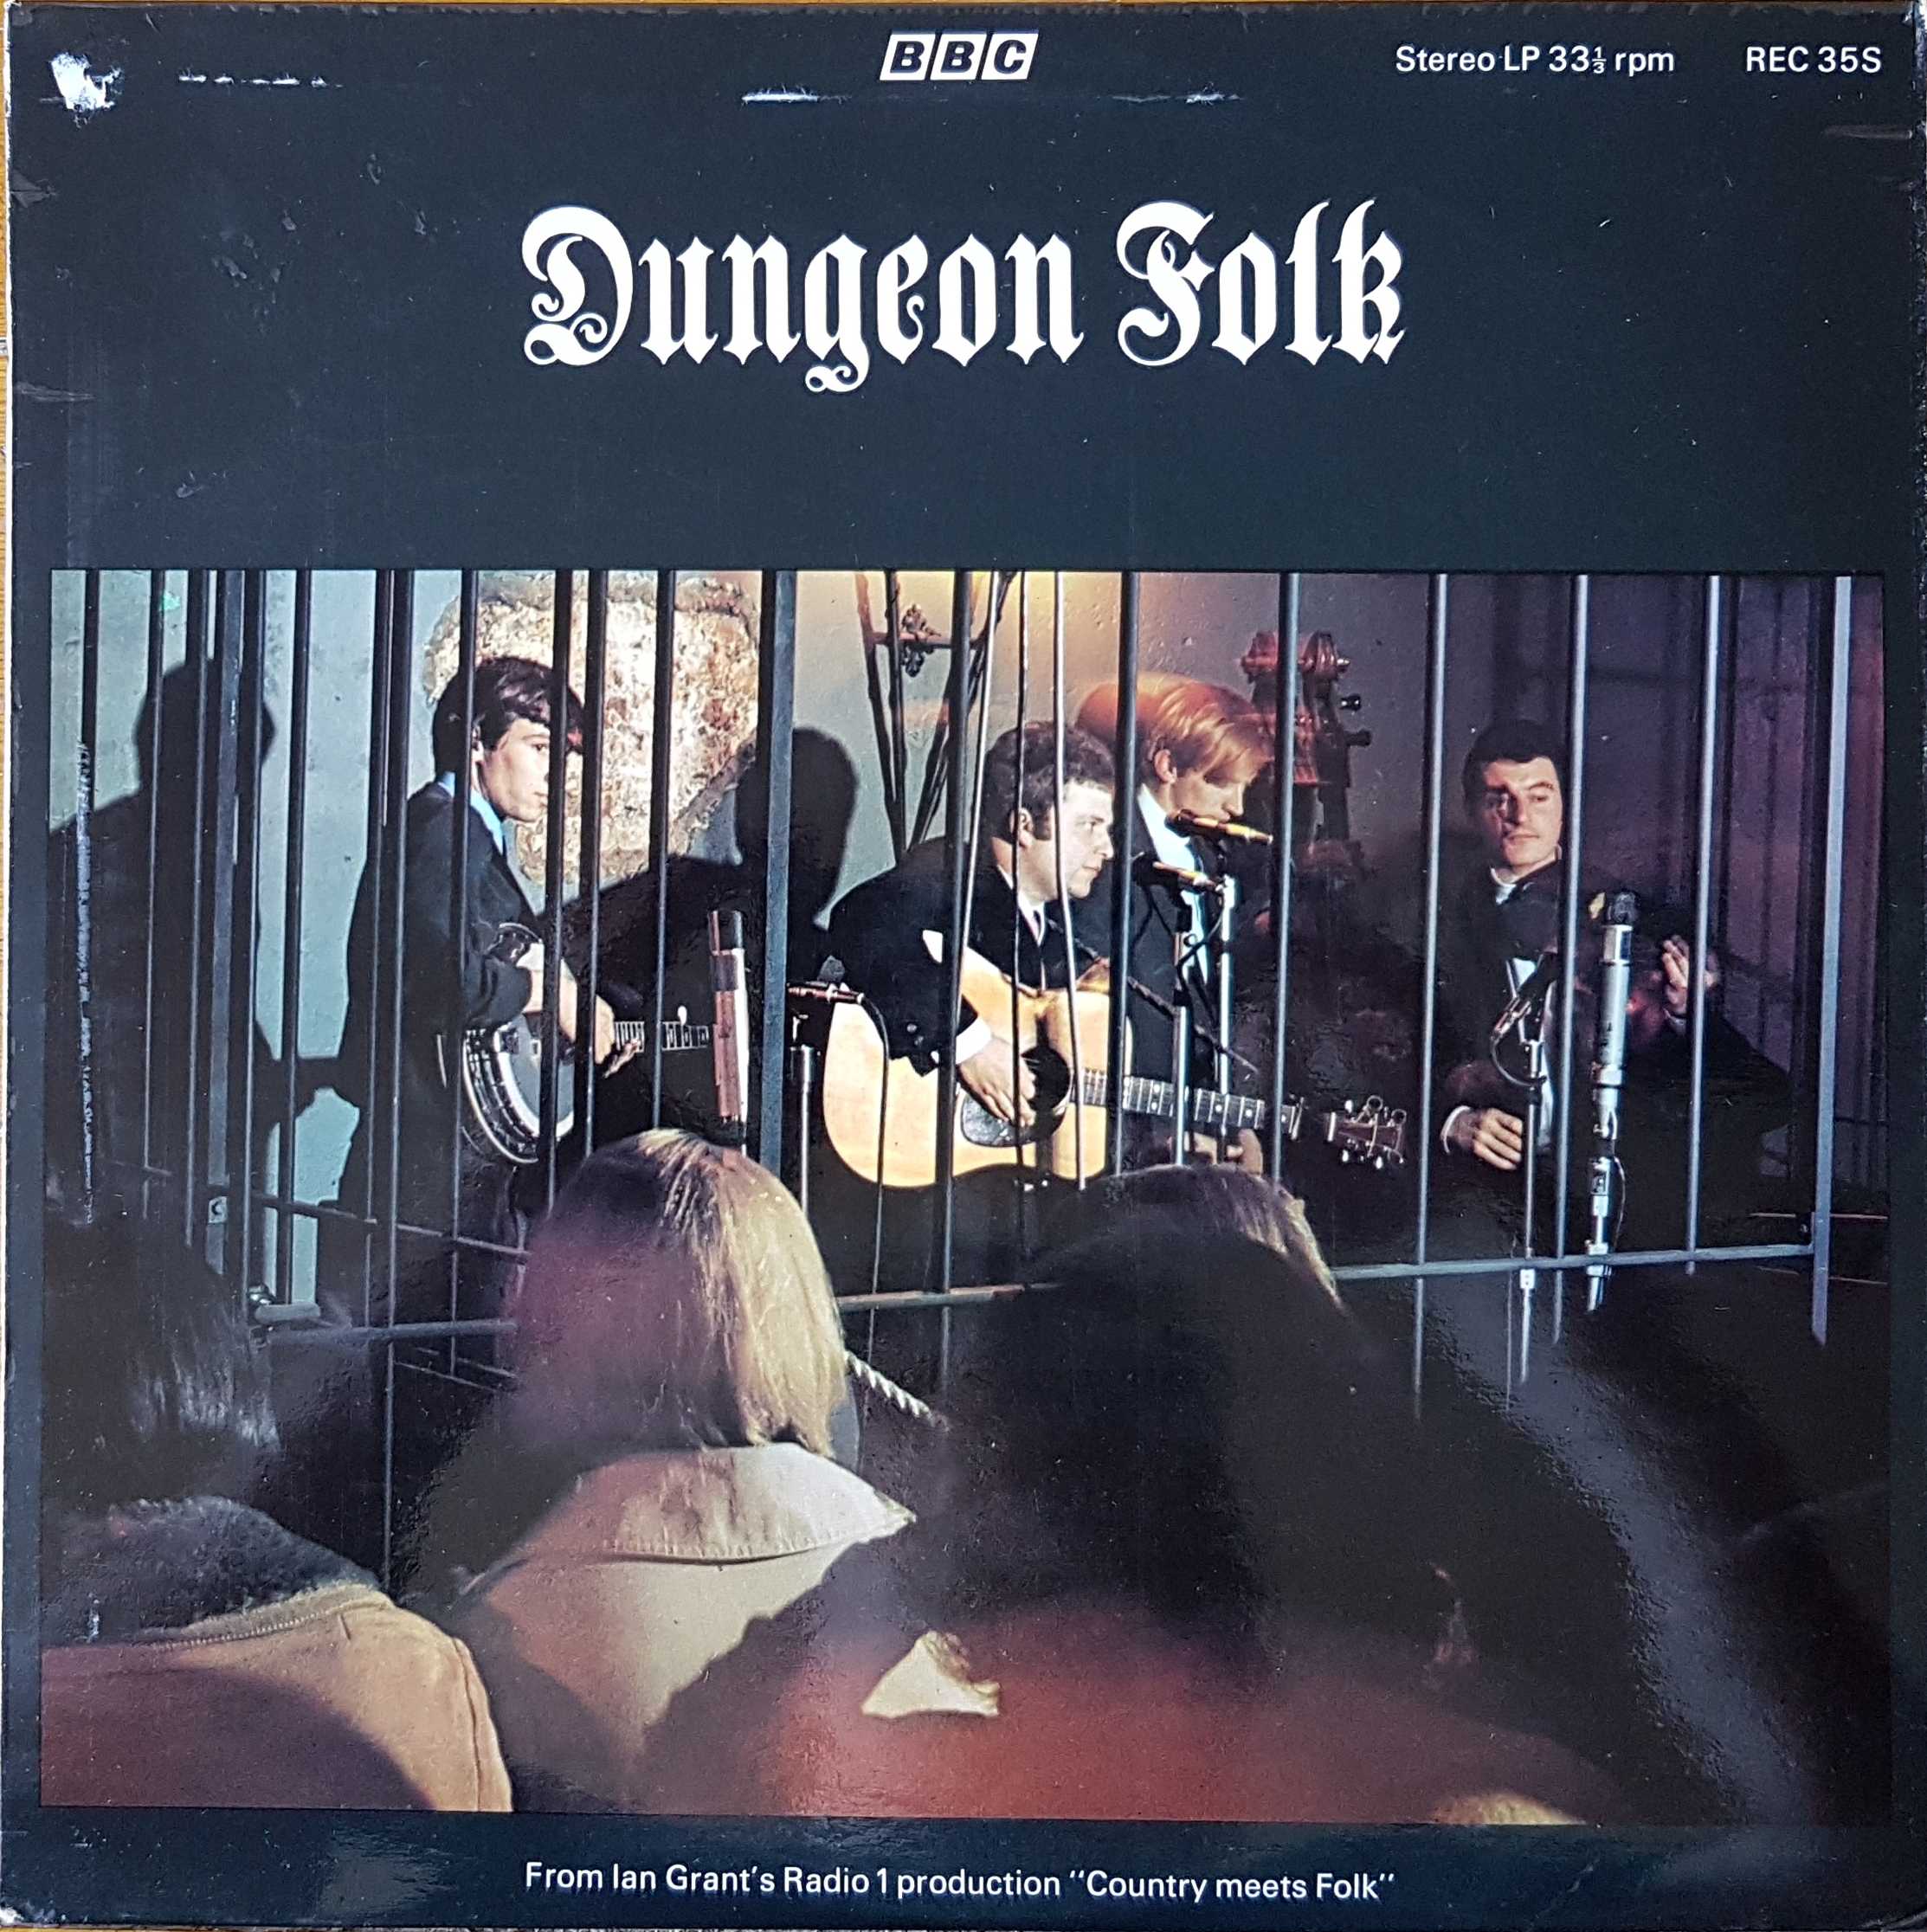 Picture of REC 35 Dungeon folk by artist Various from the BBC albums - Records and Tapes library